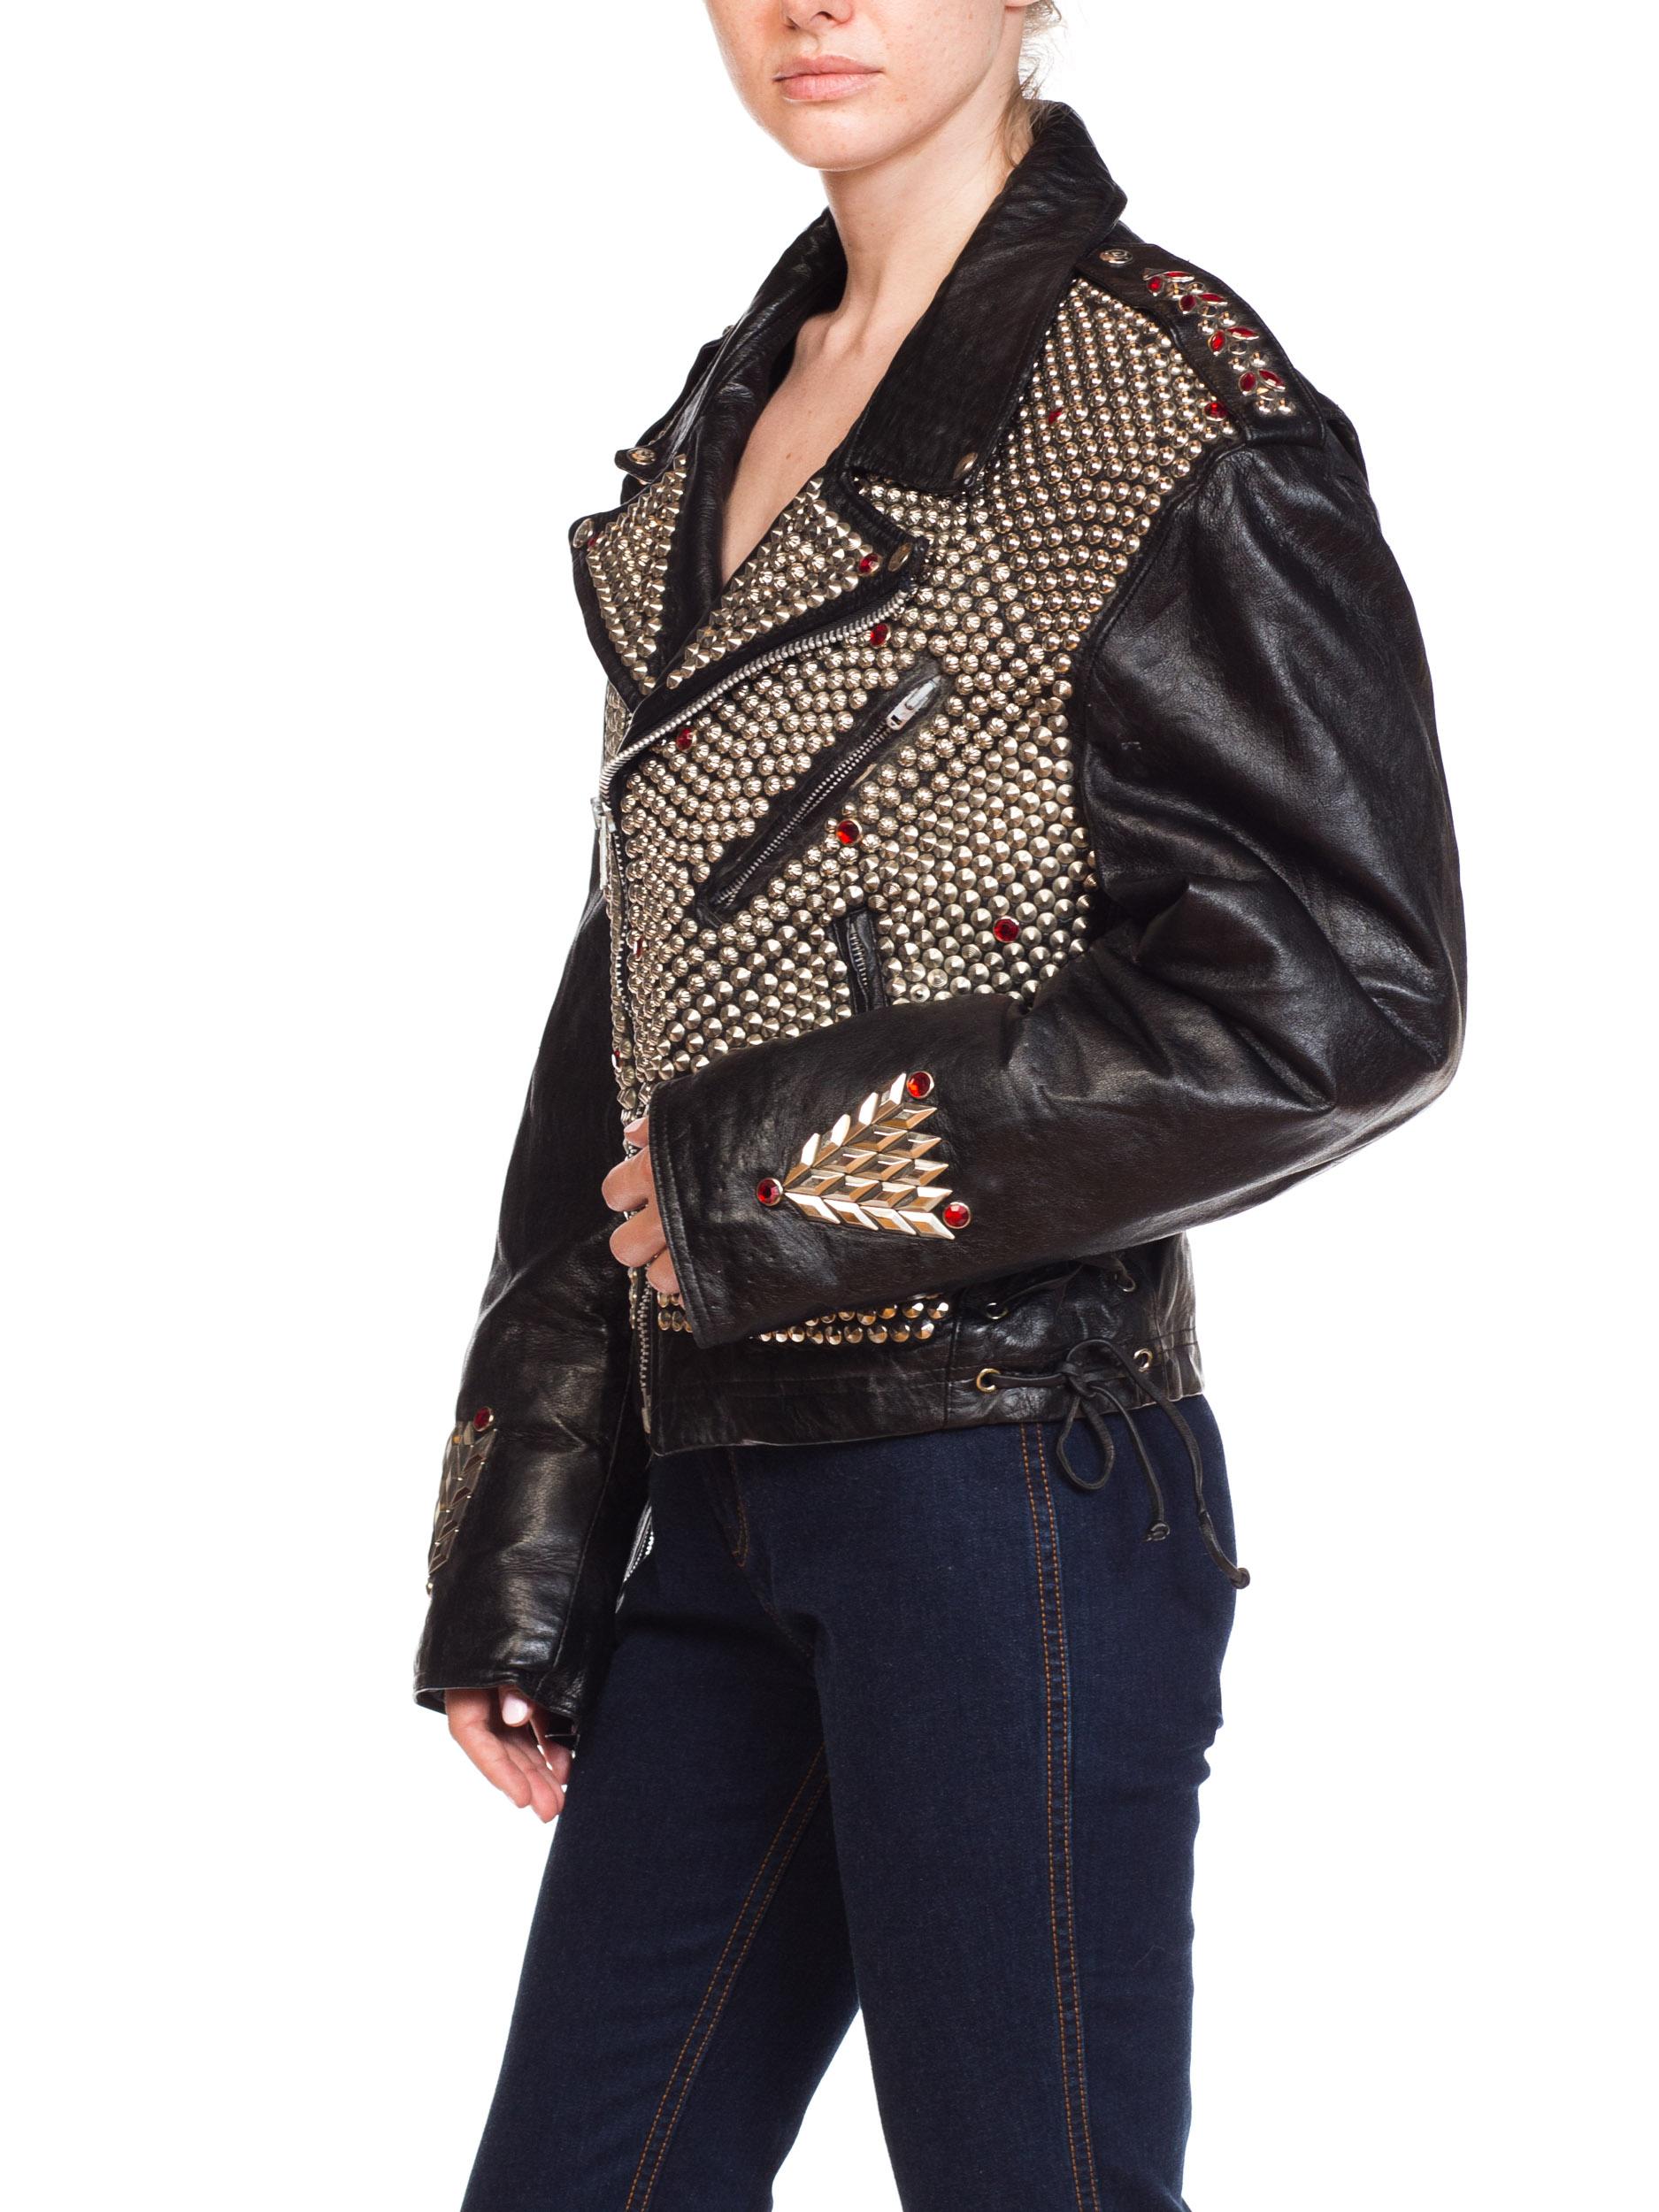 Leather Biker Jacket Covered in Studs & Crystals 6